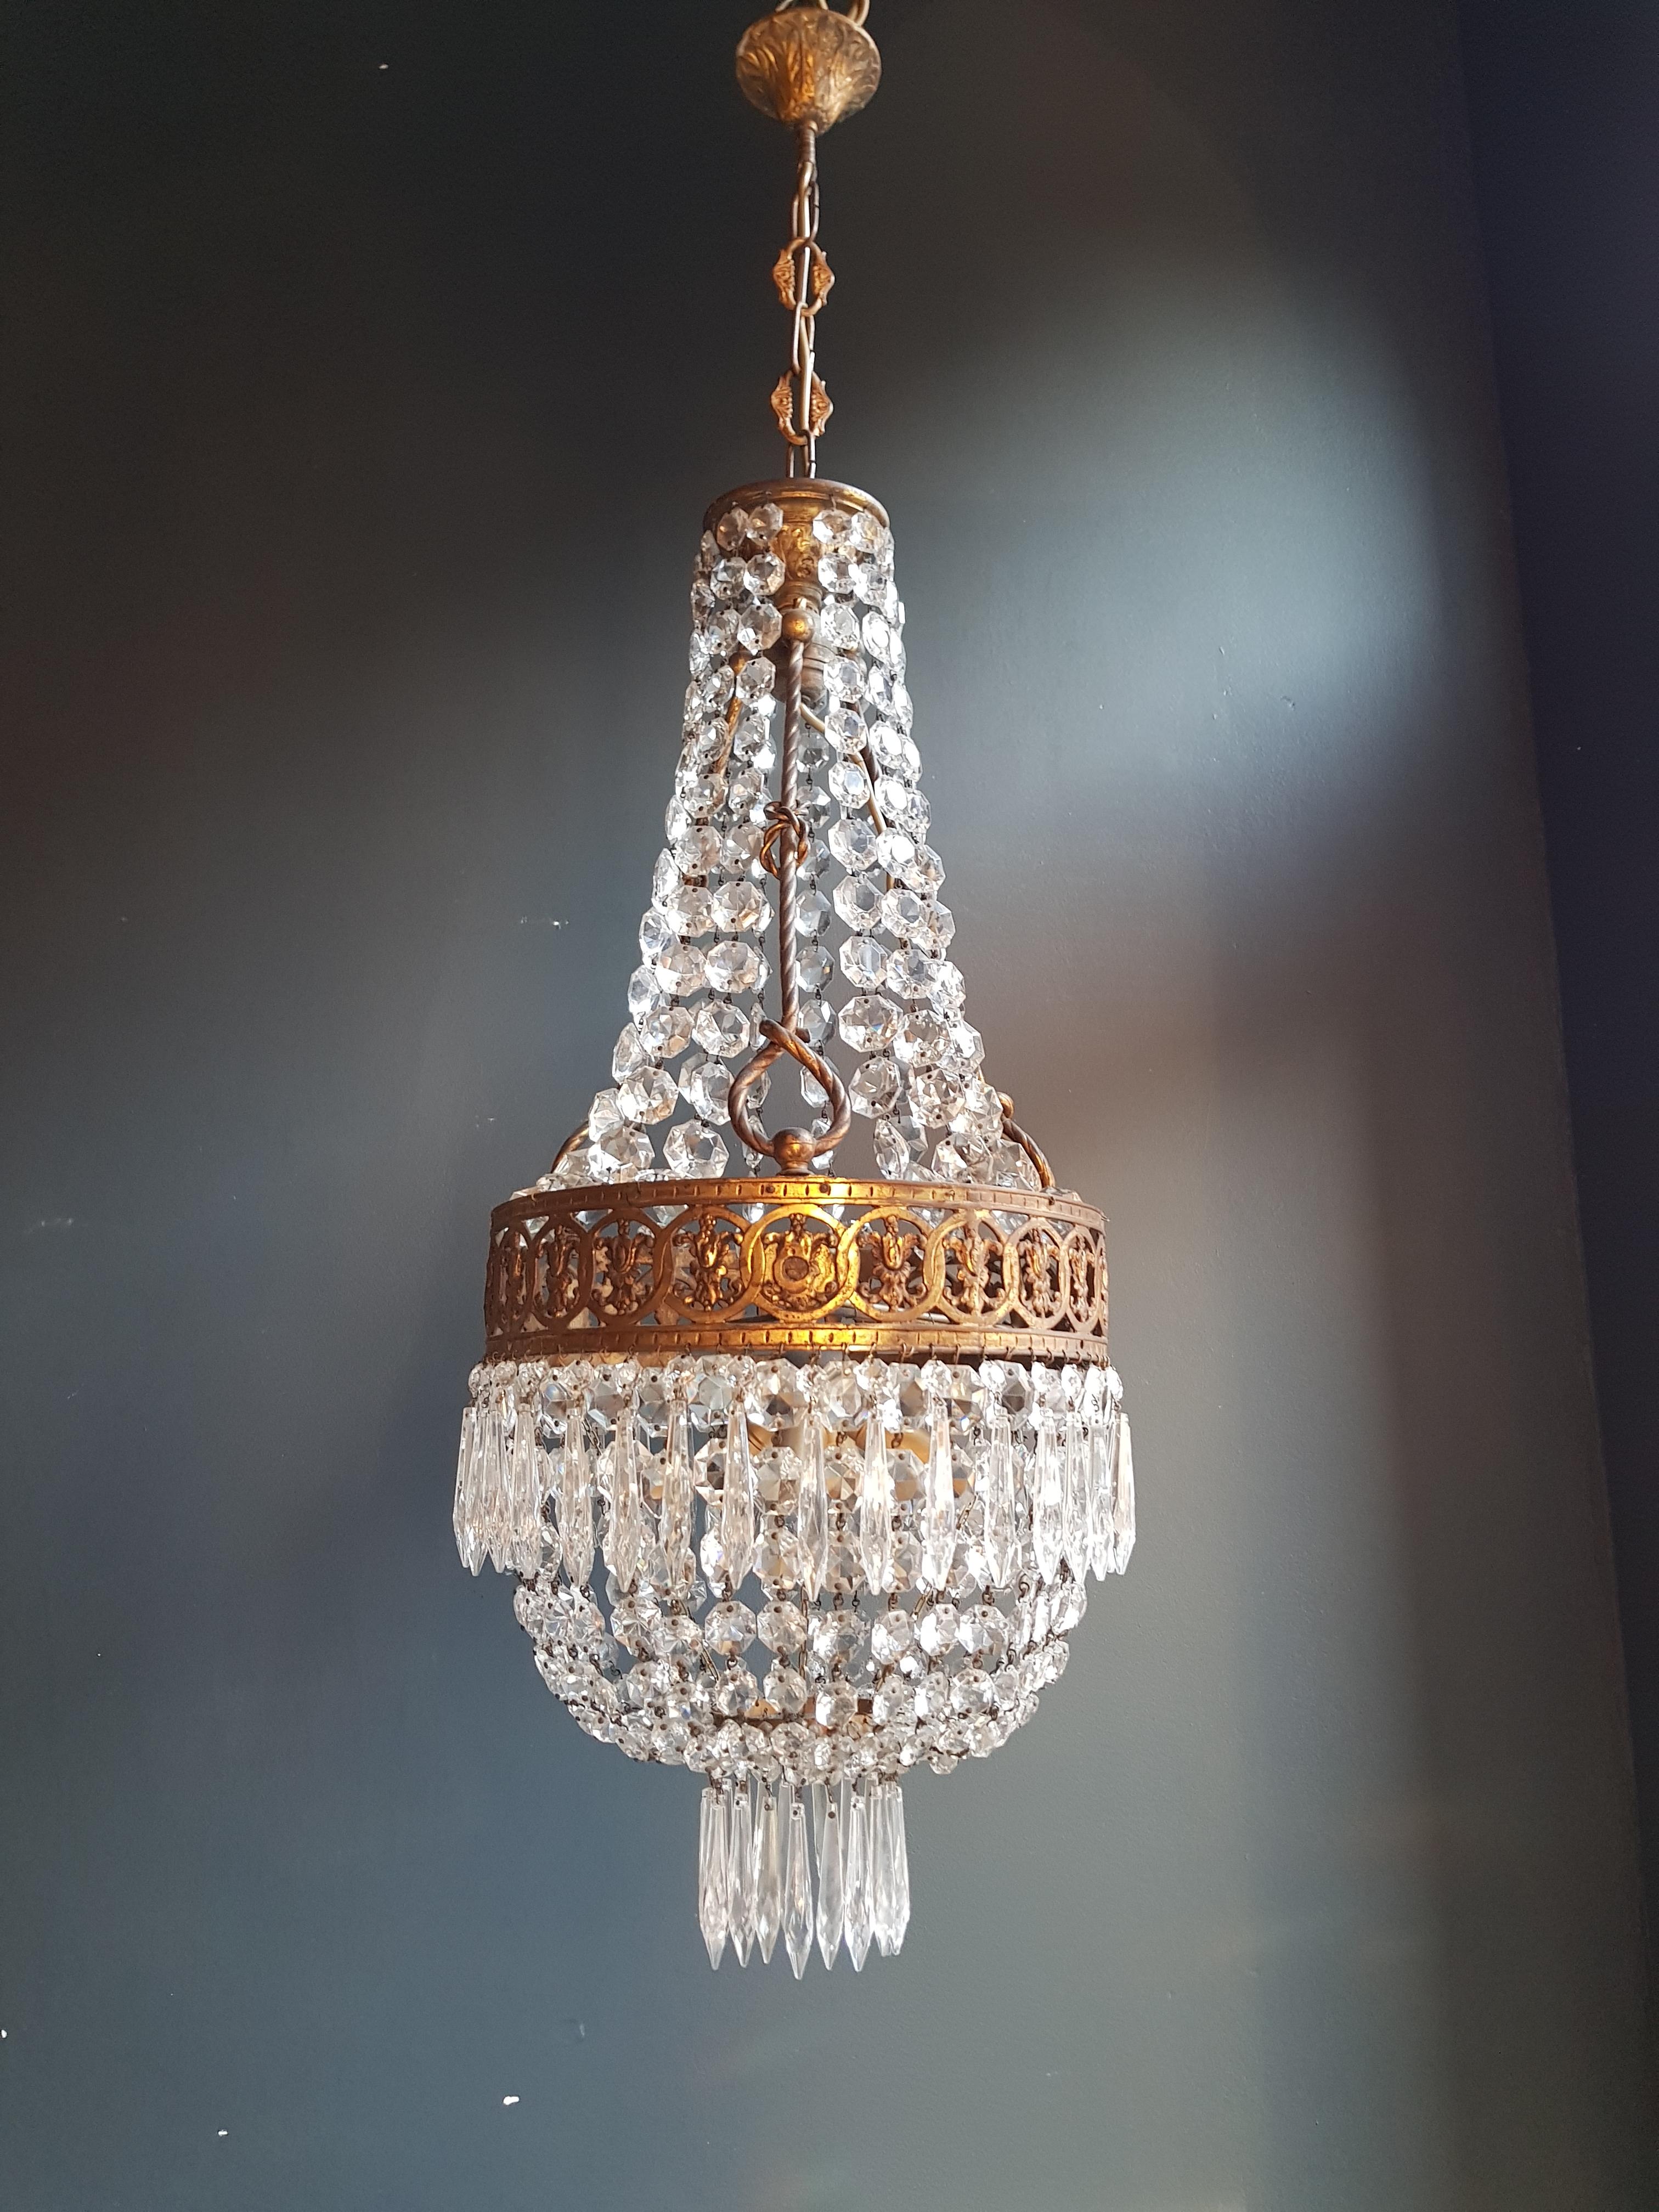 Original preserved chandelier, circa 1930. Cabling and sockets completely renewed. Crystal hand knotted
Measures: Total height: 110 cm, height without chain: 78 cm, diameter 32 cm, weight (approximately) 8kg.

Number of lights: 4 -light Bulub